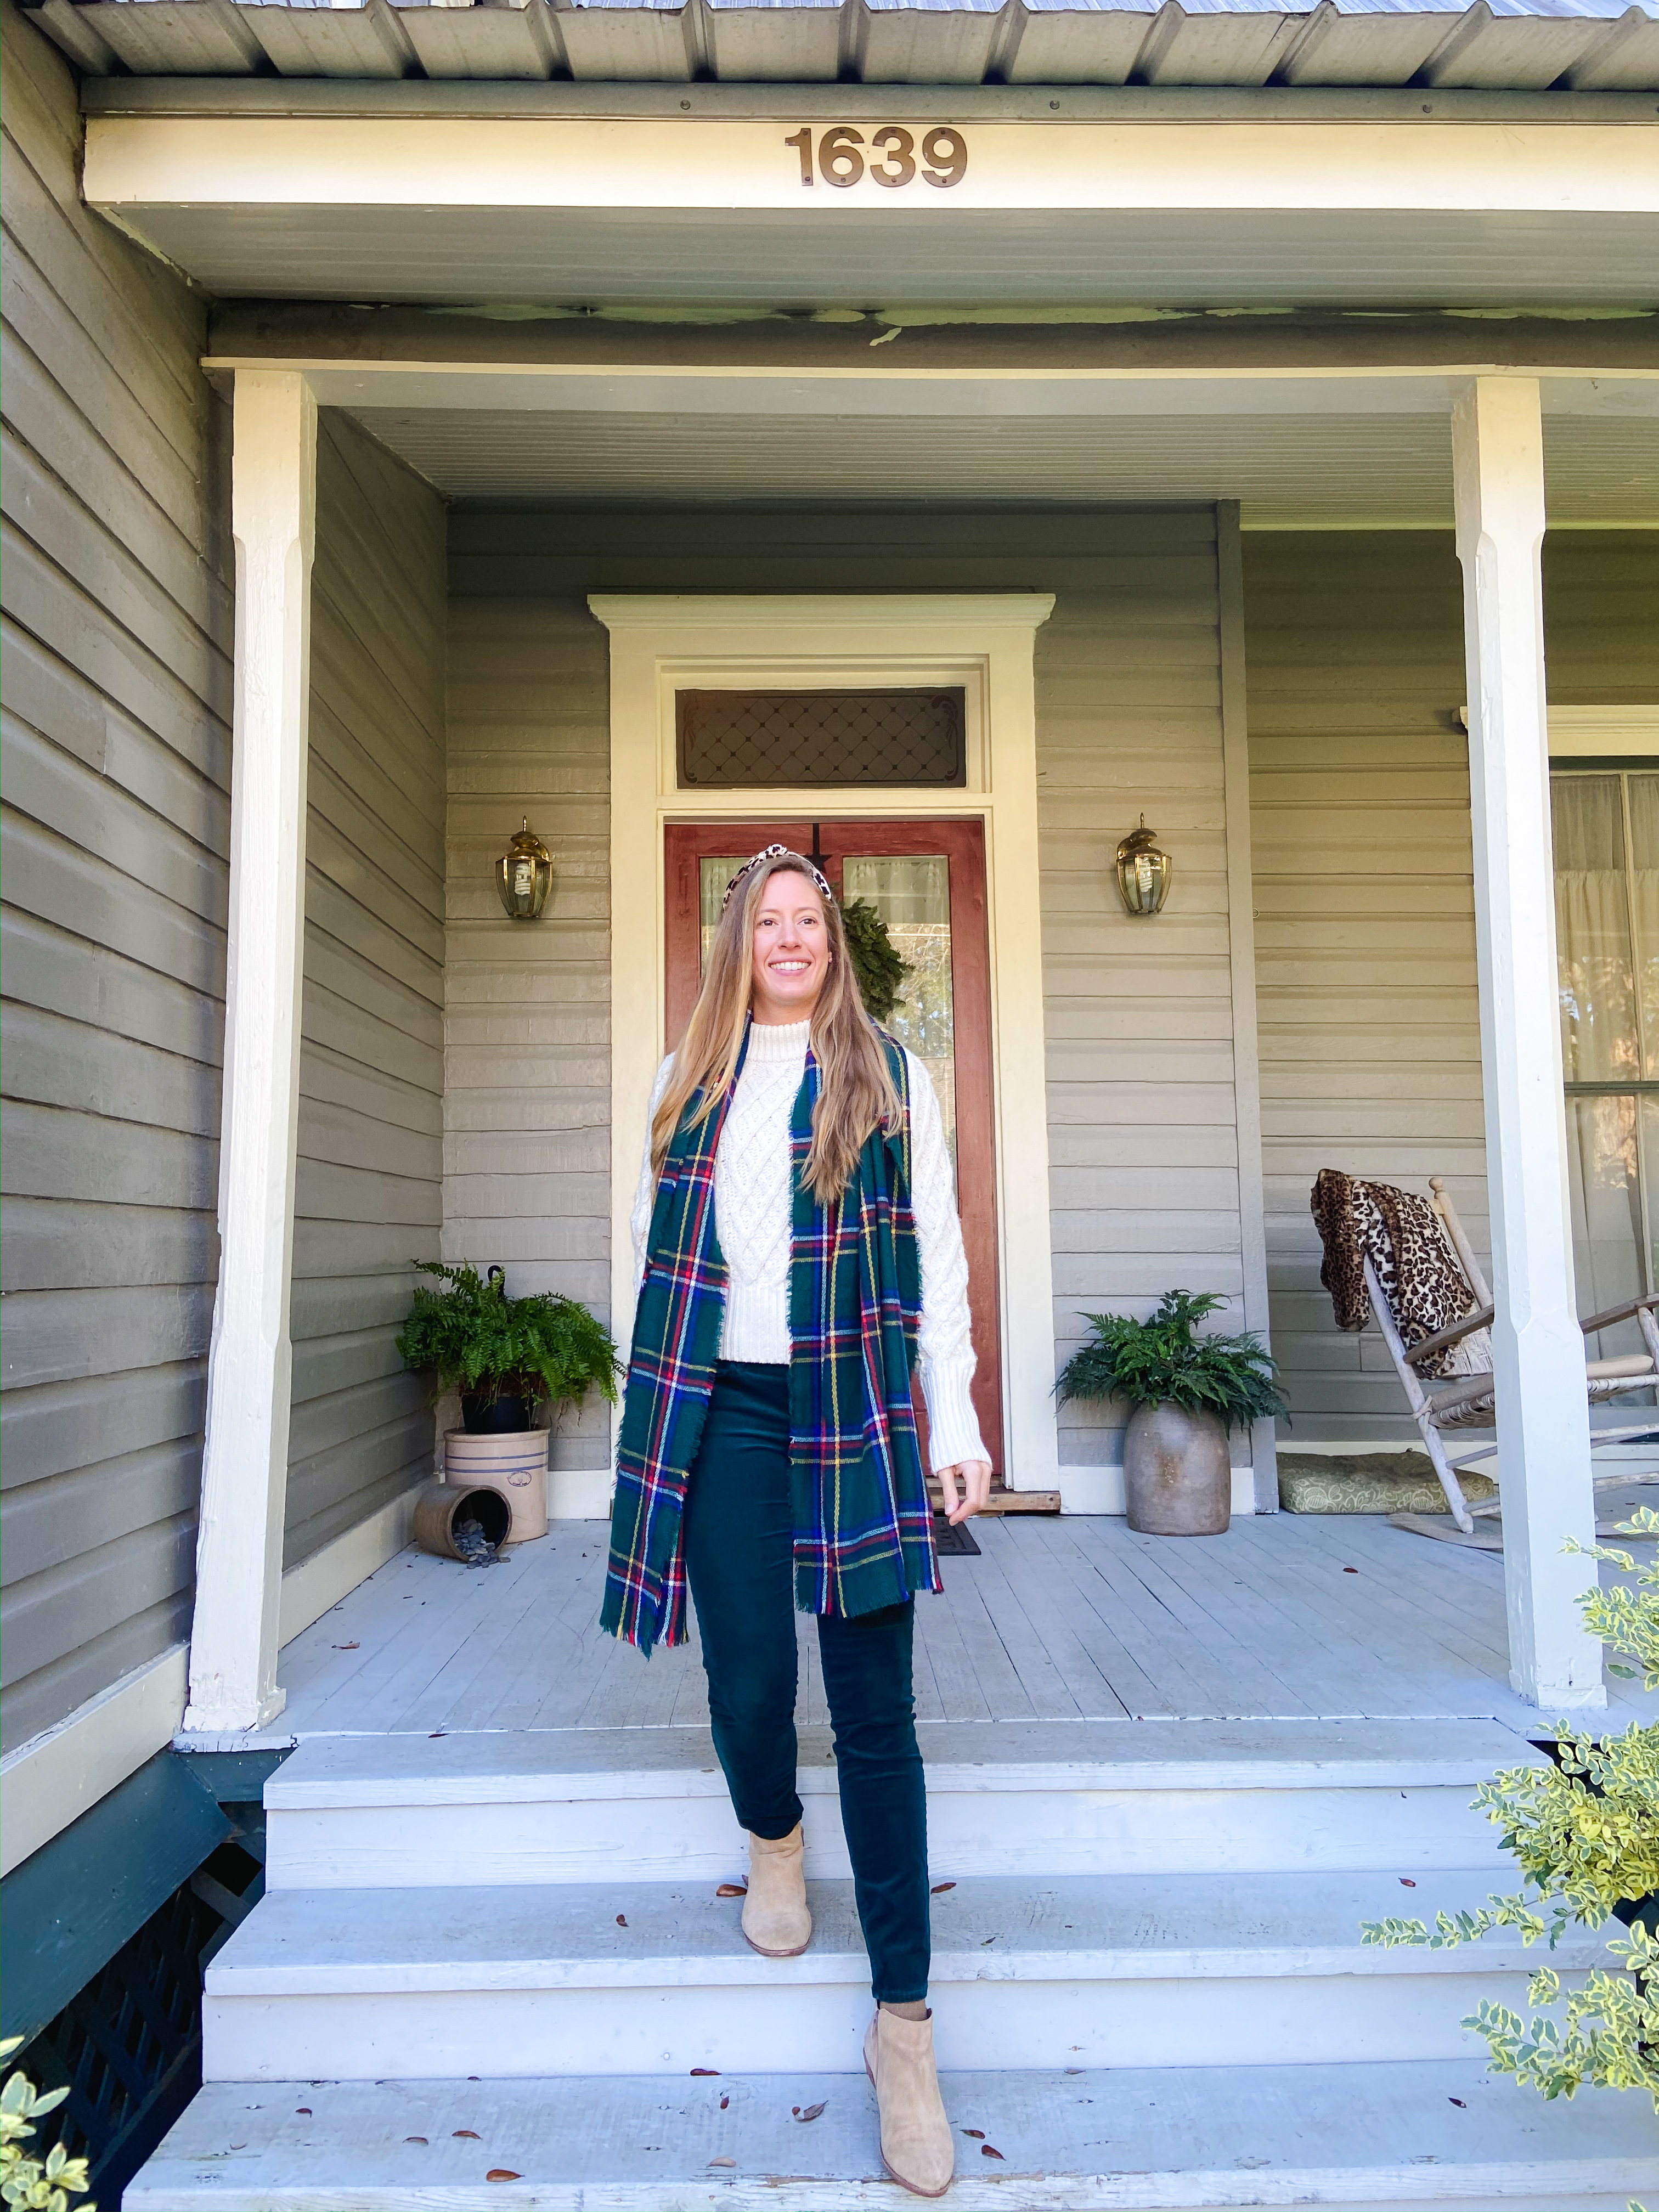 Tallahassee Travel Guide / Winter Outfit Idea / Sustainable Fashion / Sustainable Style / What to Wear in the Winter / What to Wear with Ankle Boots / How to Wear Skinny Jeans